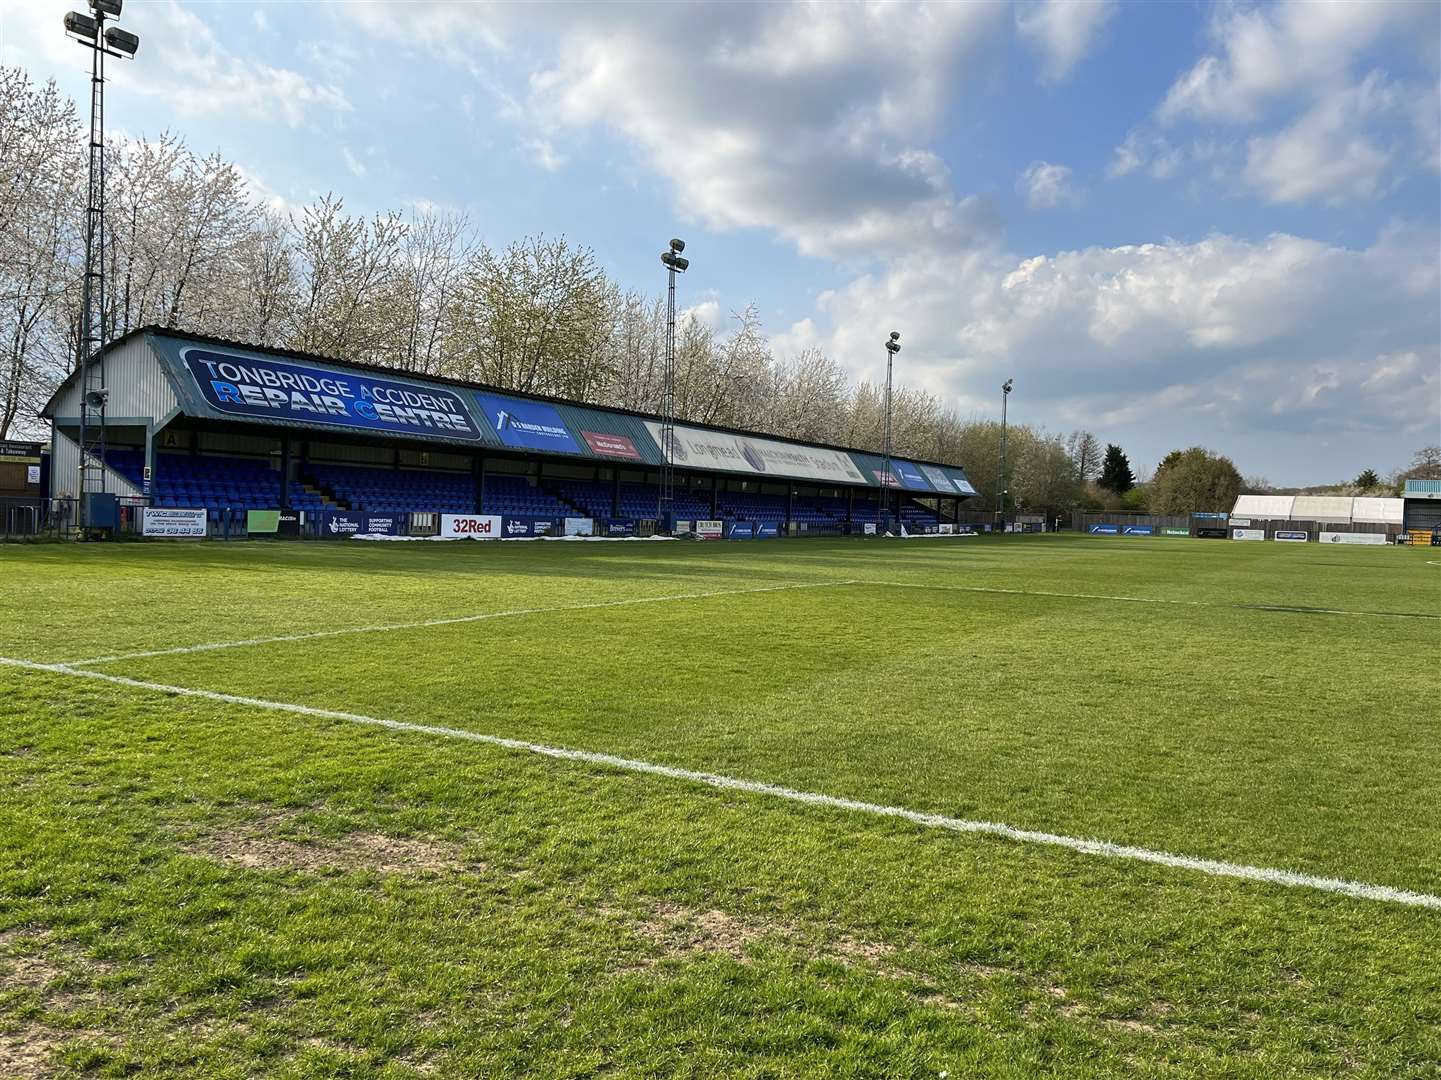 Tonbridge's grass pitch at Longmead will be dug up and replaced by 3G after the Eastbourne Borough game